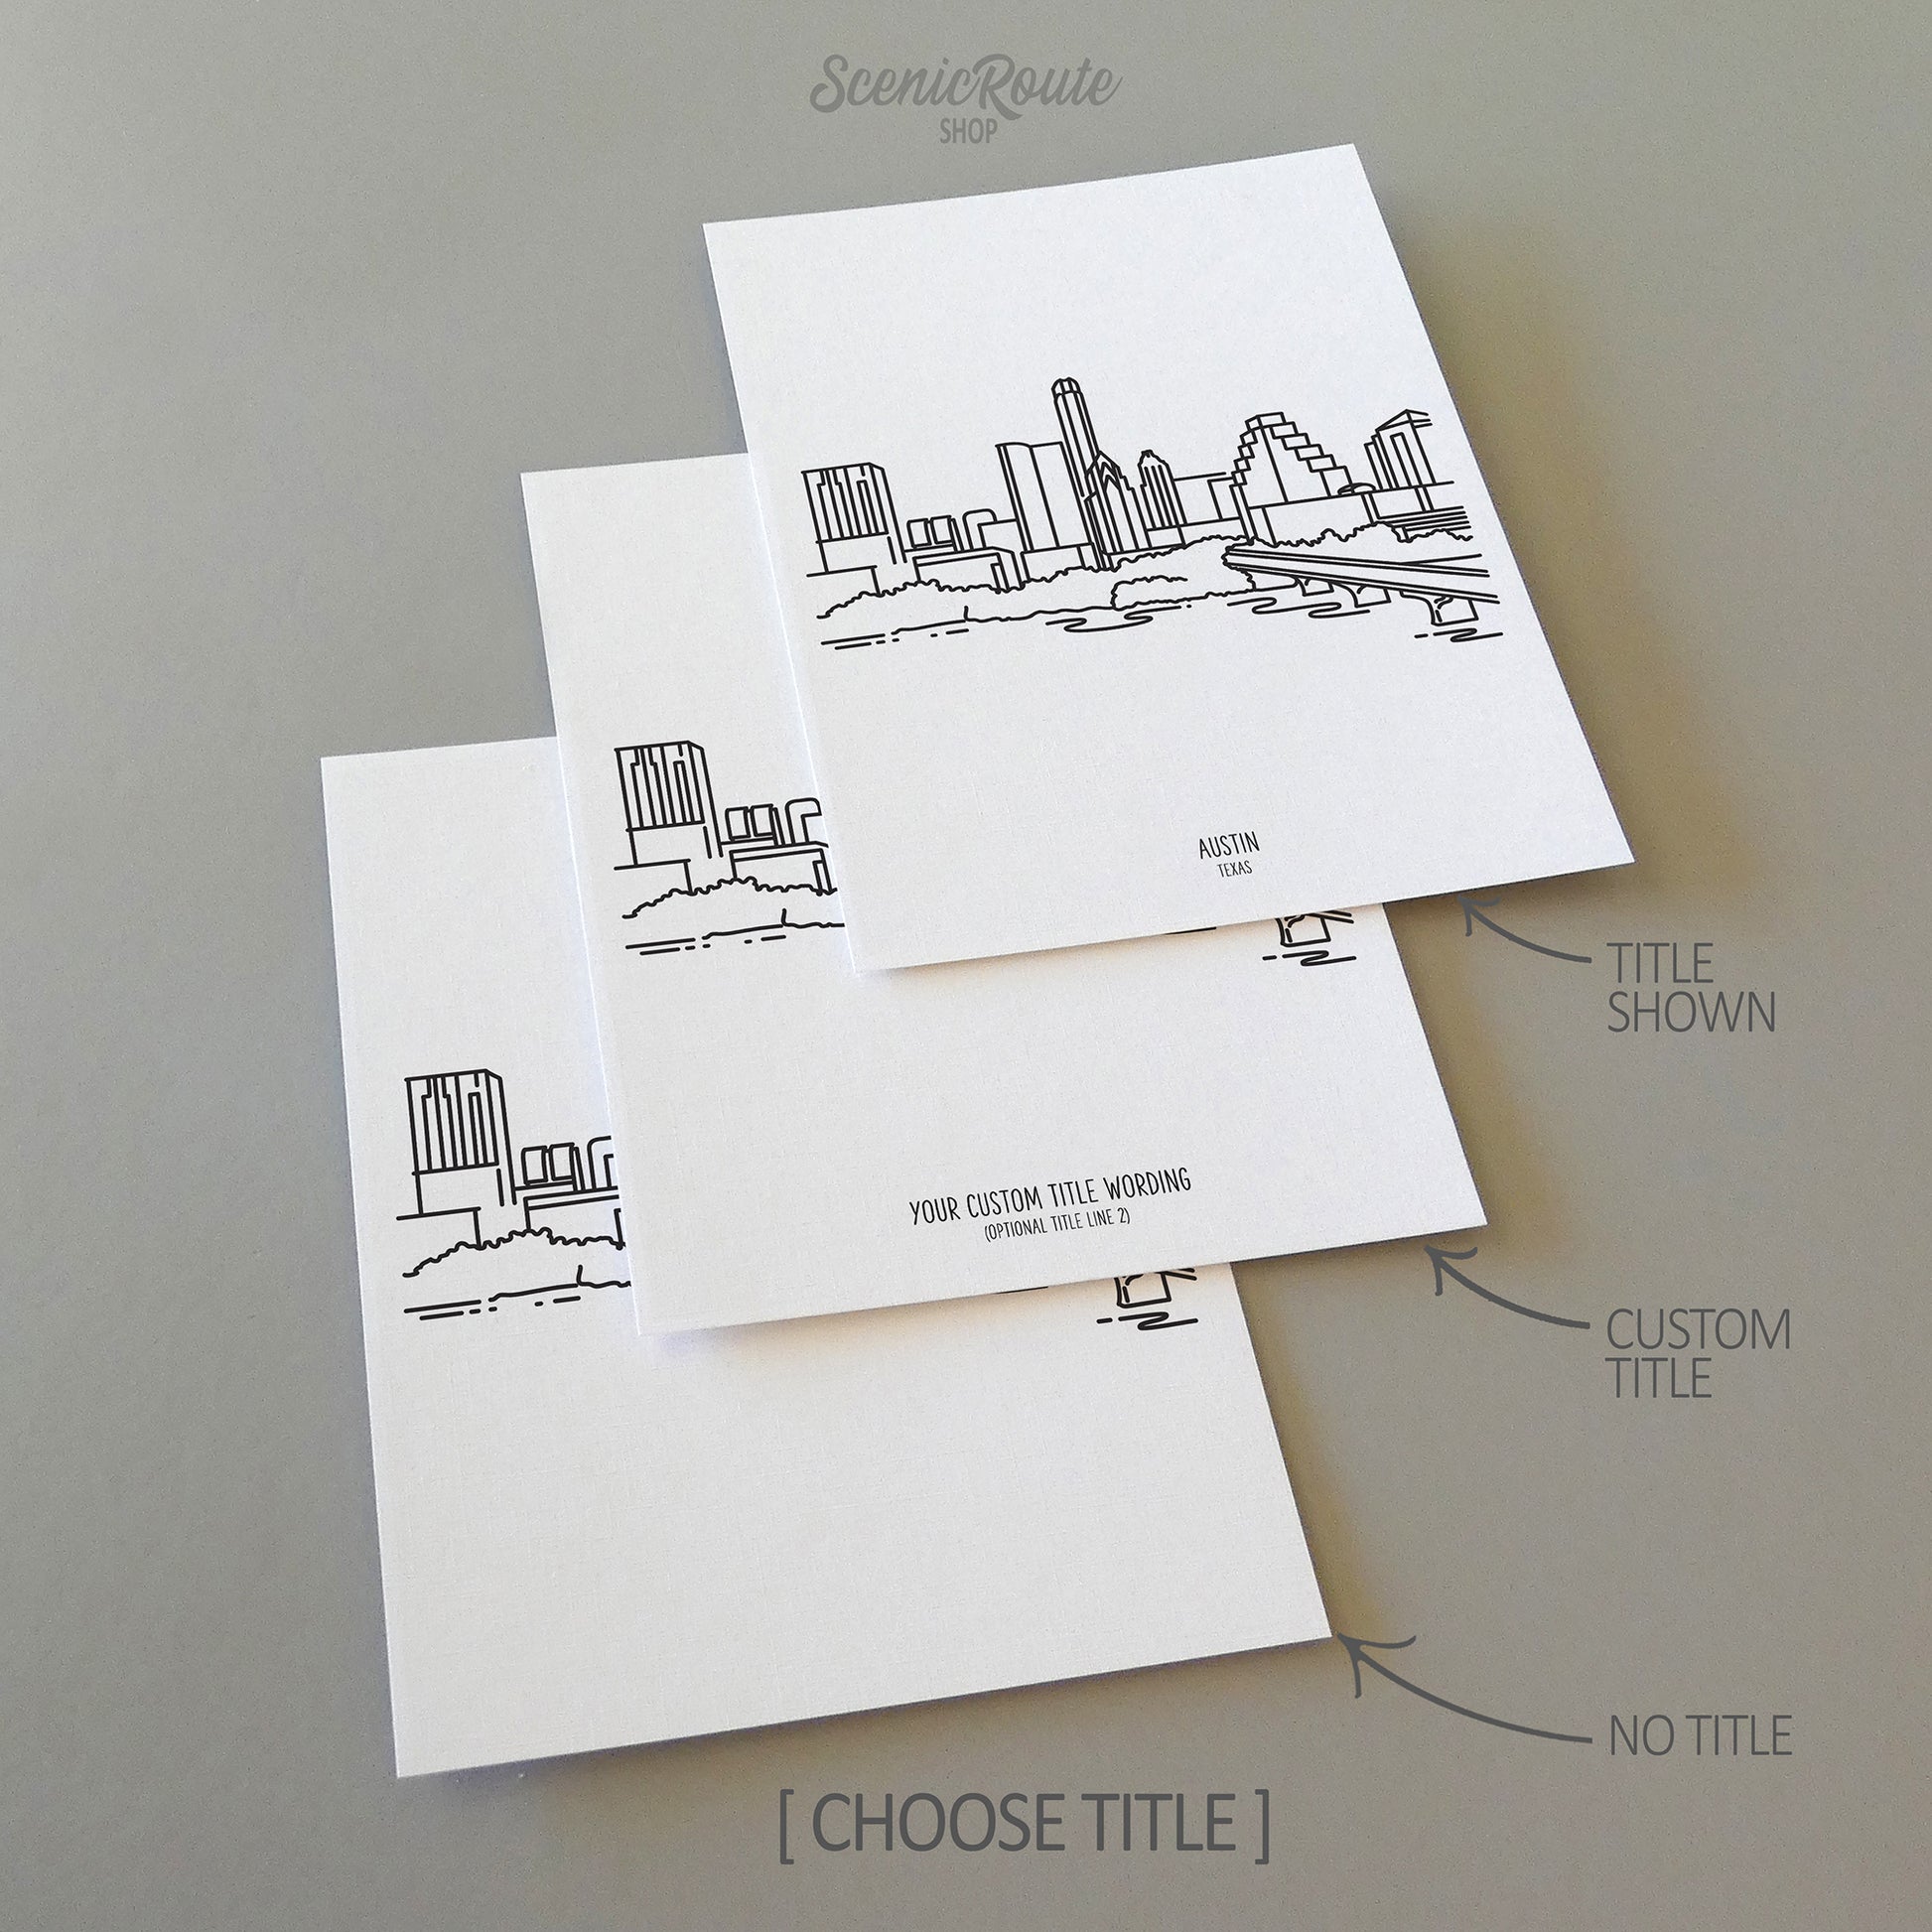 Three line art drawings of the Austin Texas Skyline on white linen paper with a gray background. The pieces are shown with title options that can be chosen and personalized.